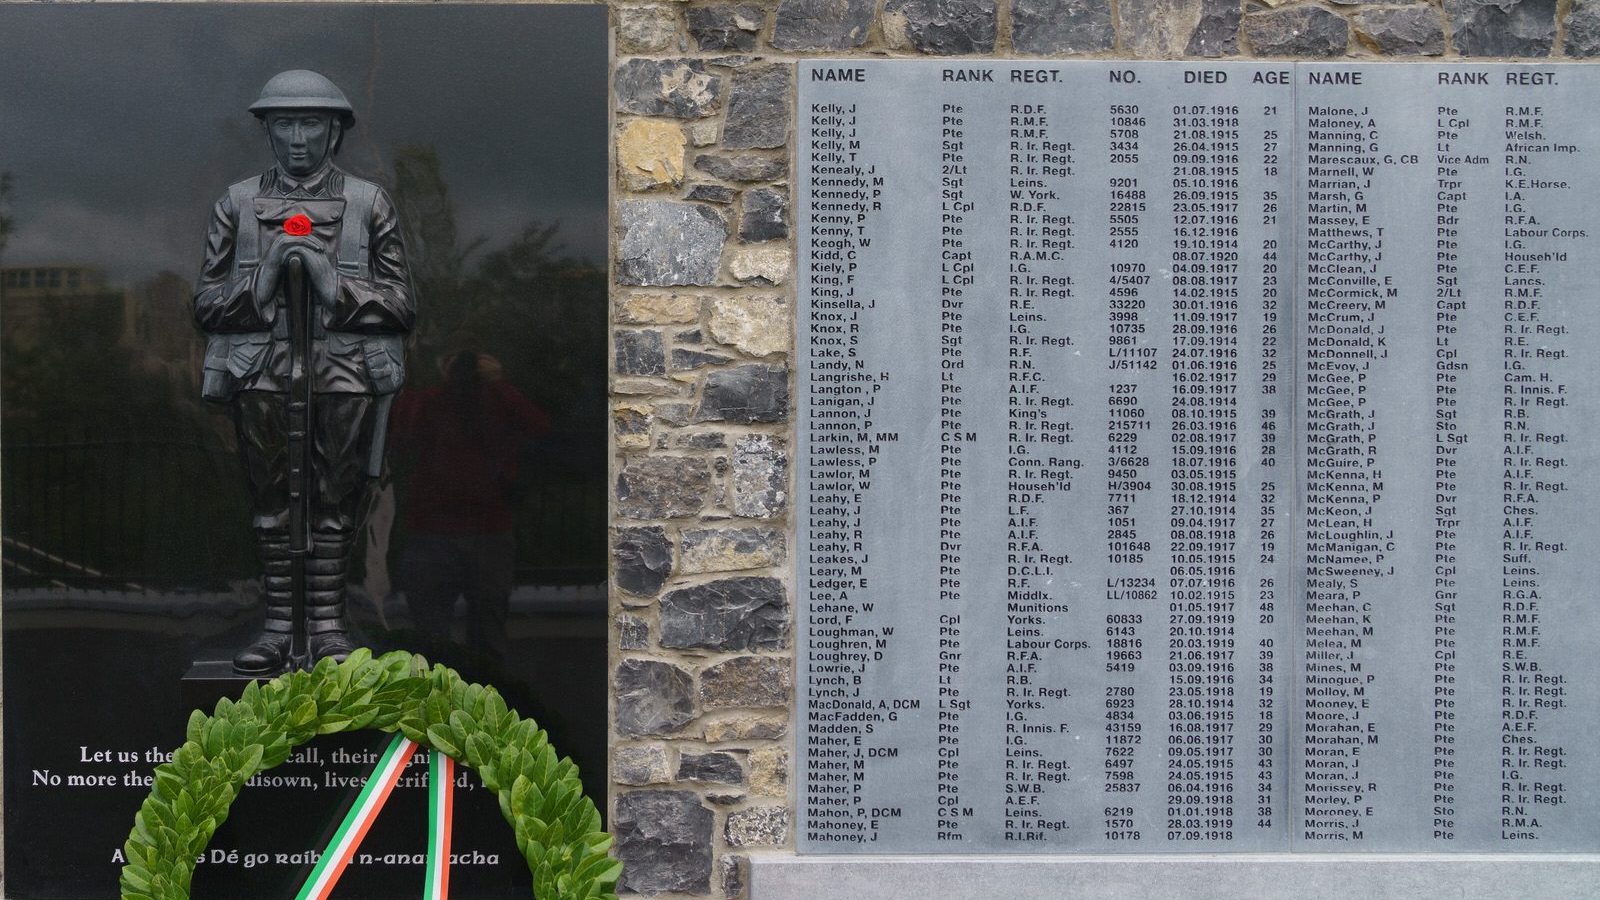 THE FIRST WORLD WAR MEMORIAL UNVEILED IN 2018 AT THE PEACE PARK IN KILKENNY [ALSO THE STORY OF 14 YEAR OLD THOMAS WOODGATE]-226811-1